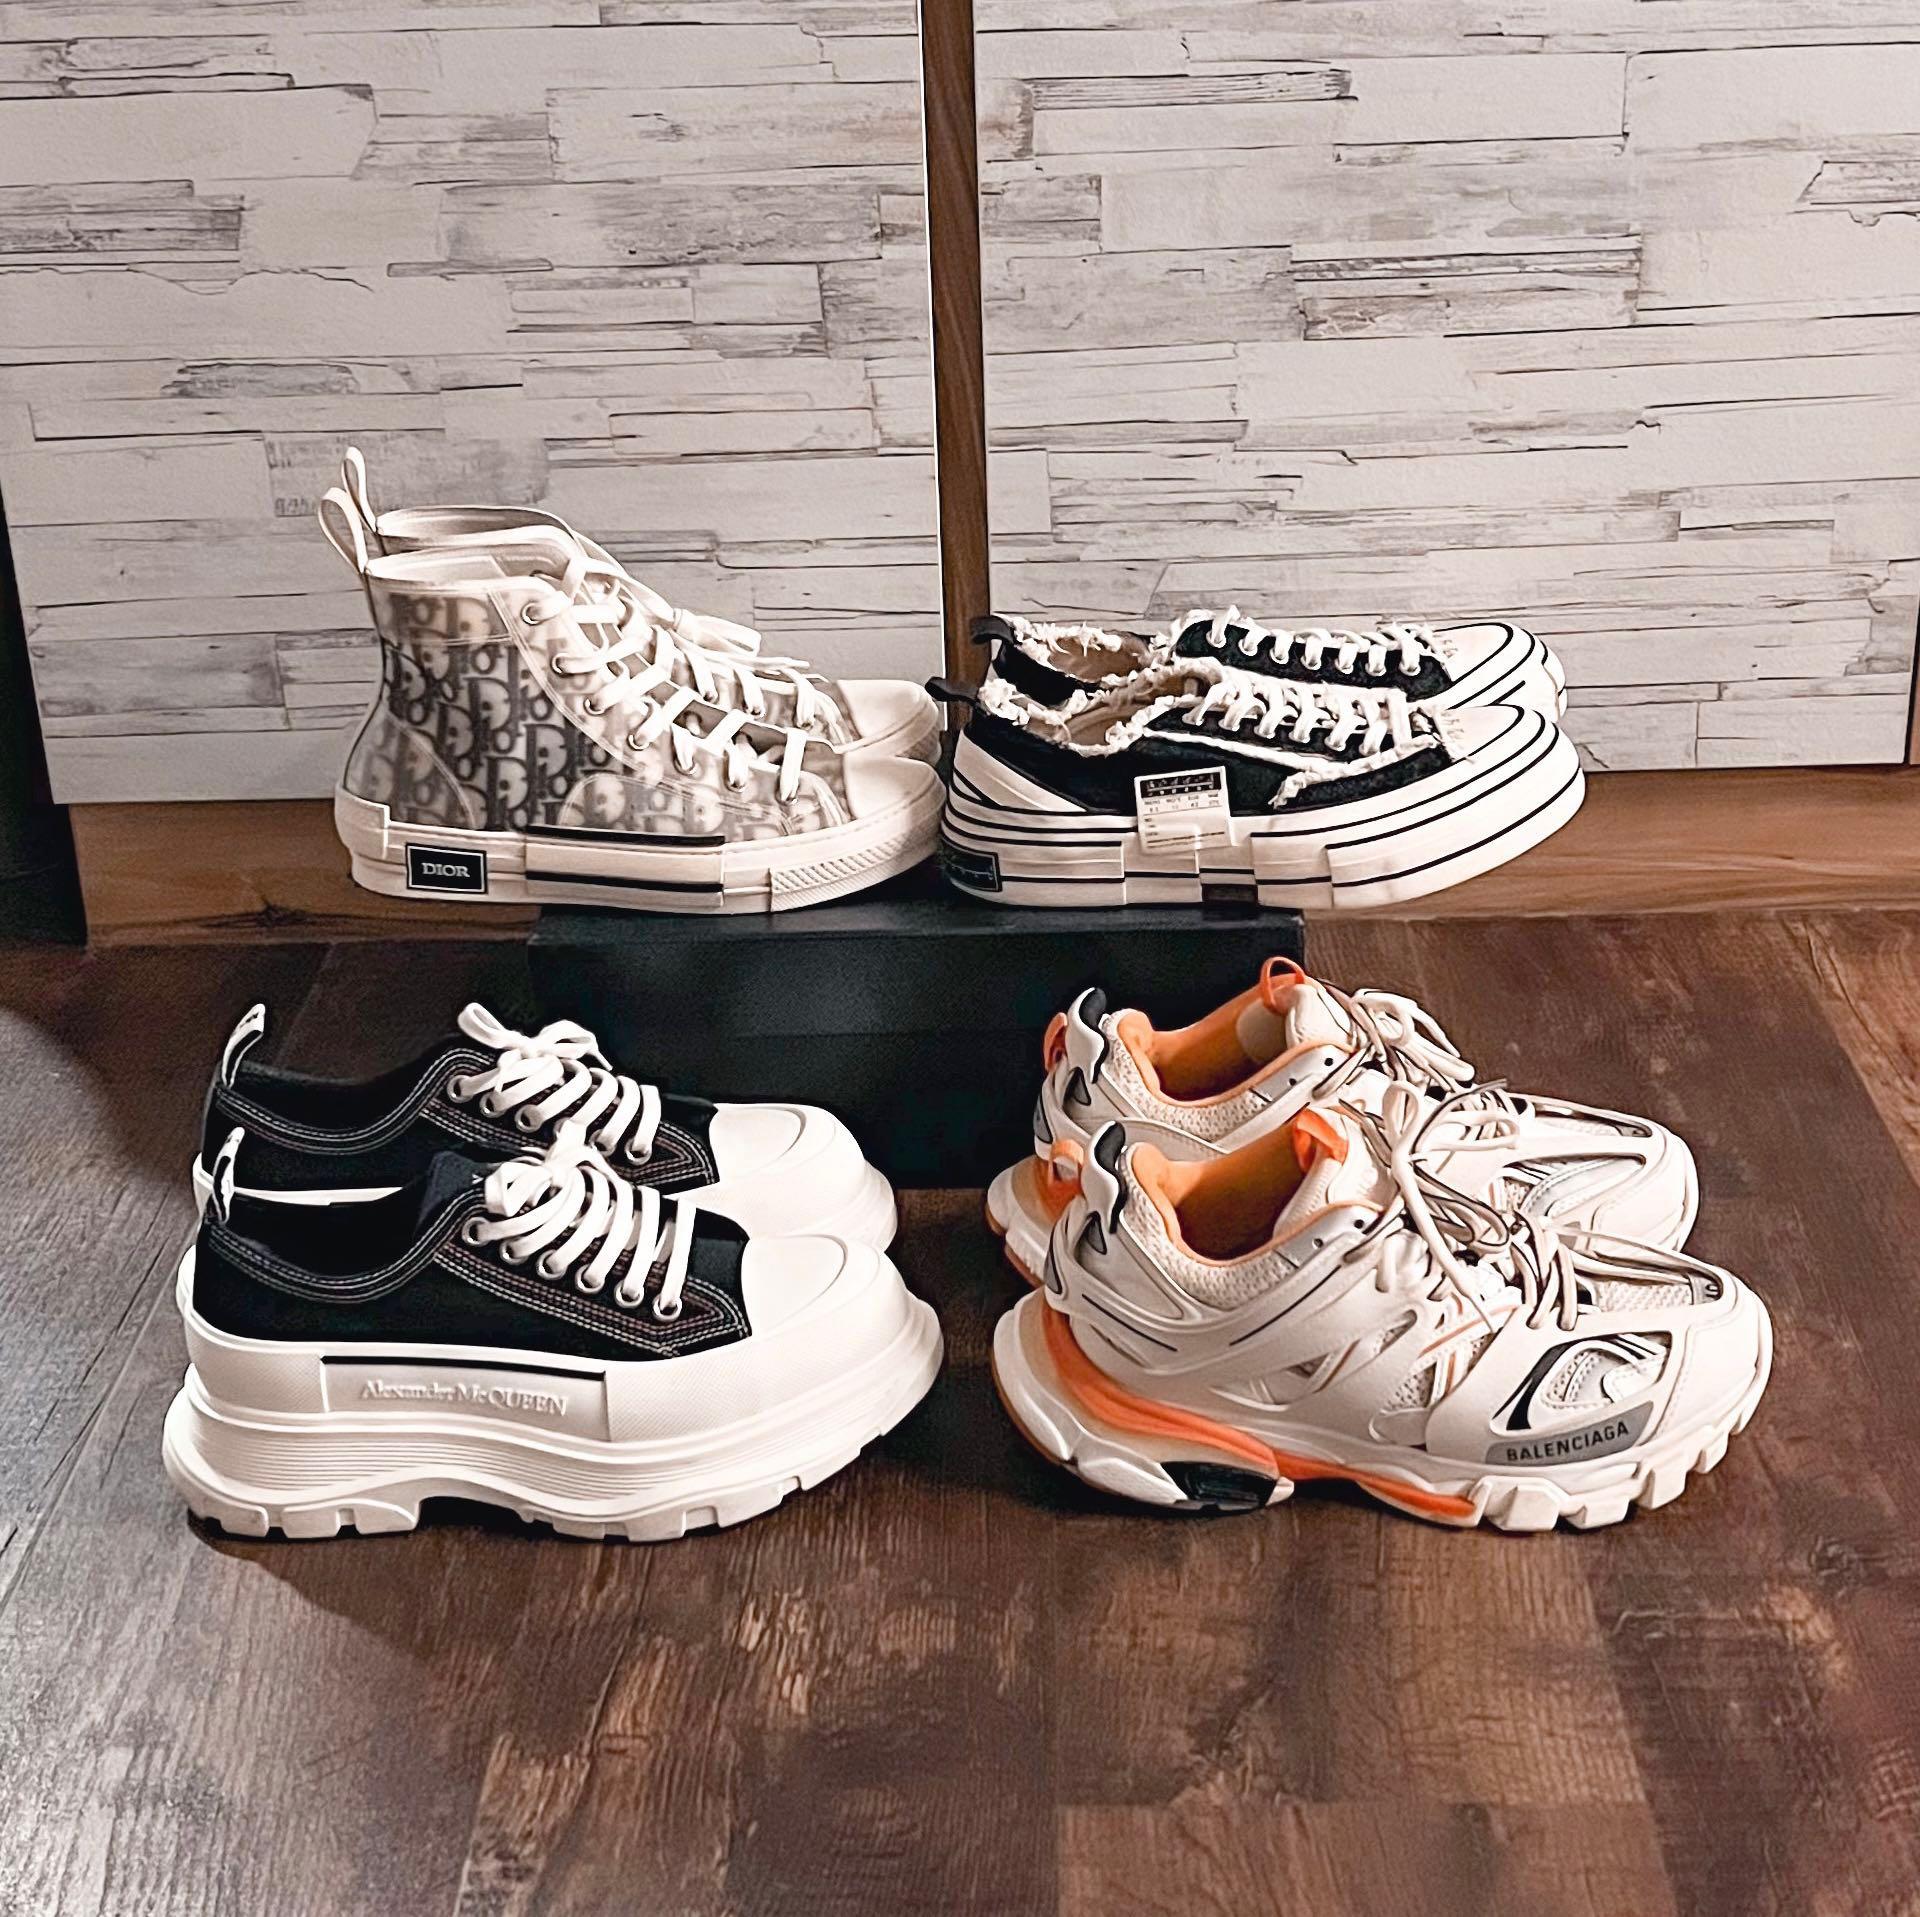 Chris on Twitter These Chunky Sneakers Are Like a Balenciaga Triple S  amp Dior Runner Hybrid httpstcoVxYo6CNUx2 Ashaddict  balenciagatriples dior Featured Shopping httpstcovQ0QjtvIef   Twitter